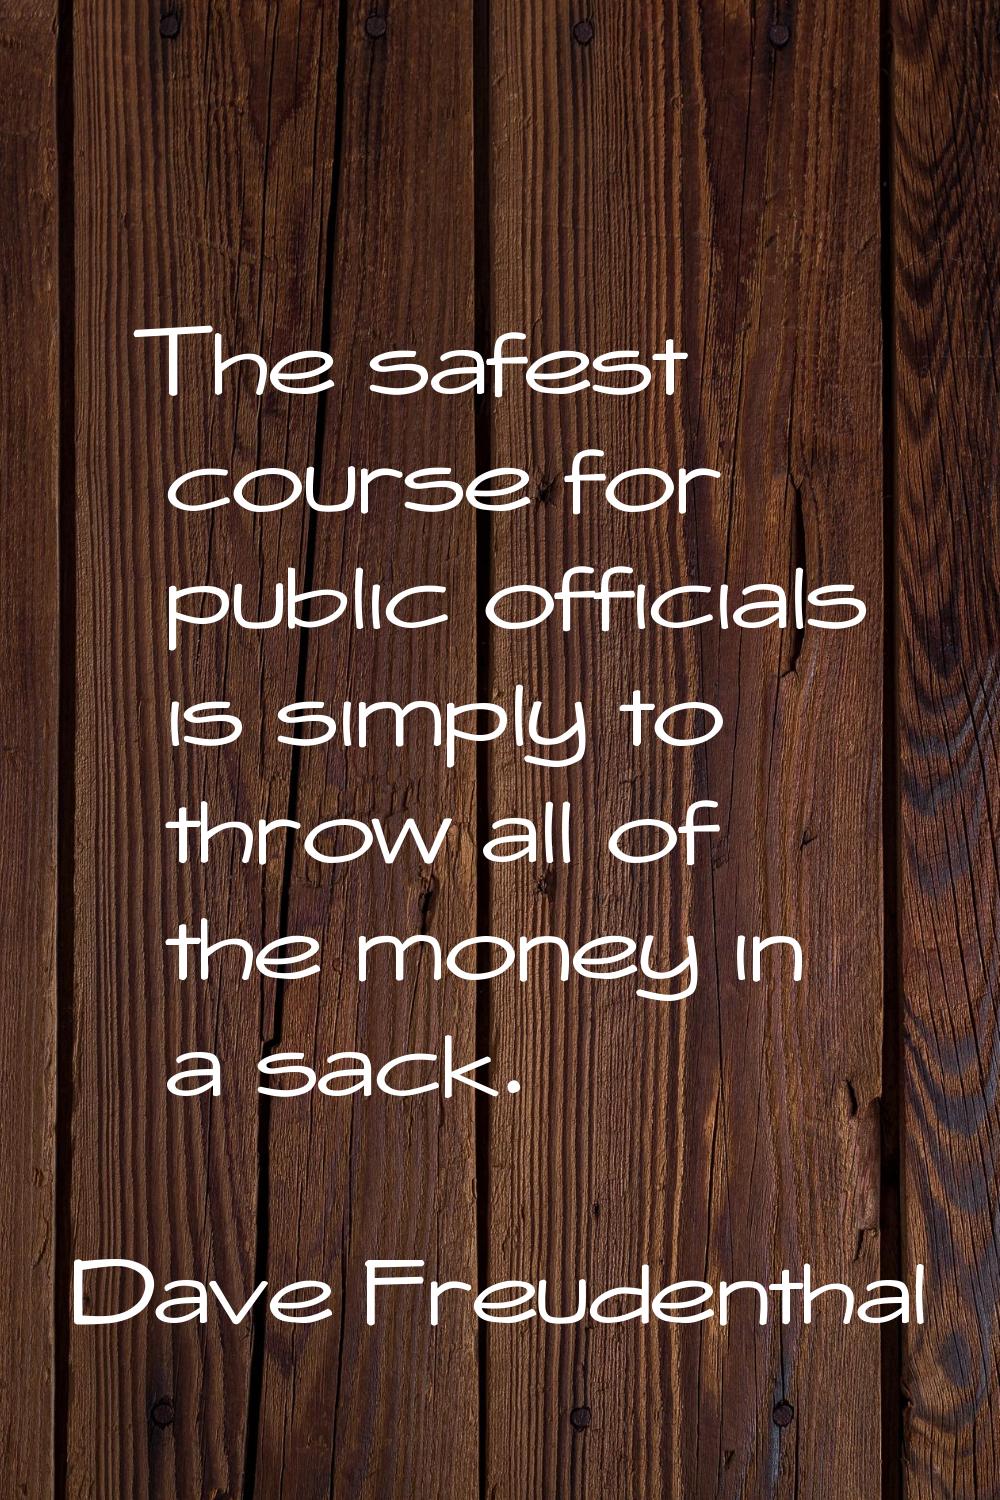 The safest course for public officials is simply to throw all of the money in a sack.